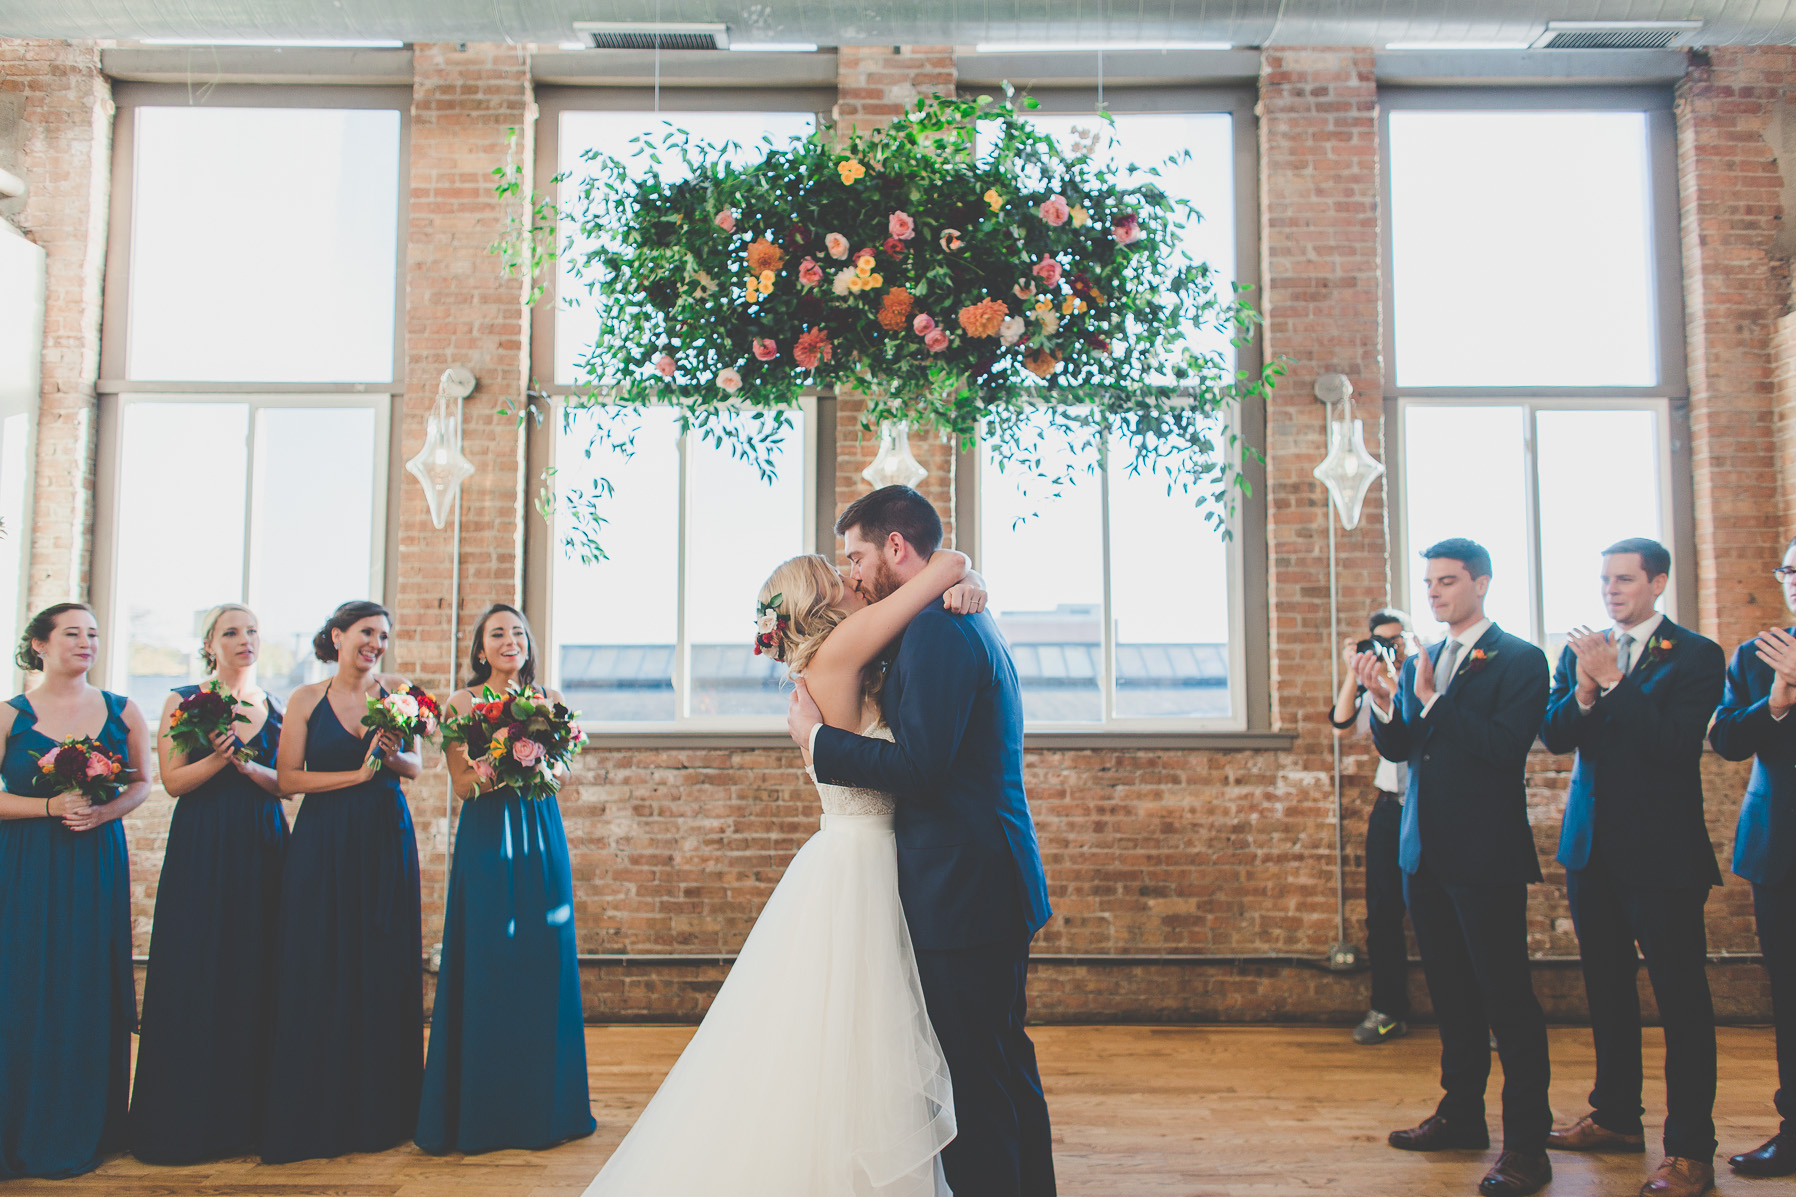 Bride and groom kissing fall wedding with floating flower ceremonial altar of pink garden roses, yellow lisianthus, orange dahlias, and foliage.